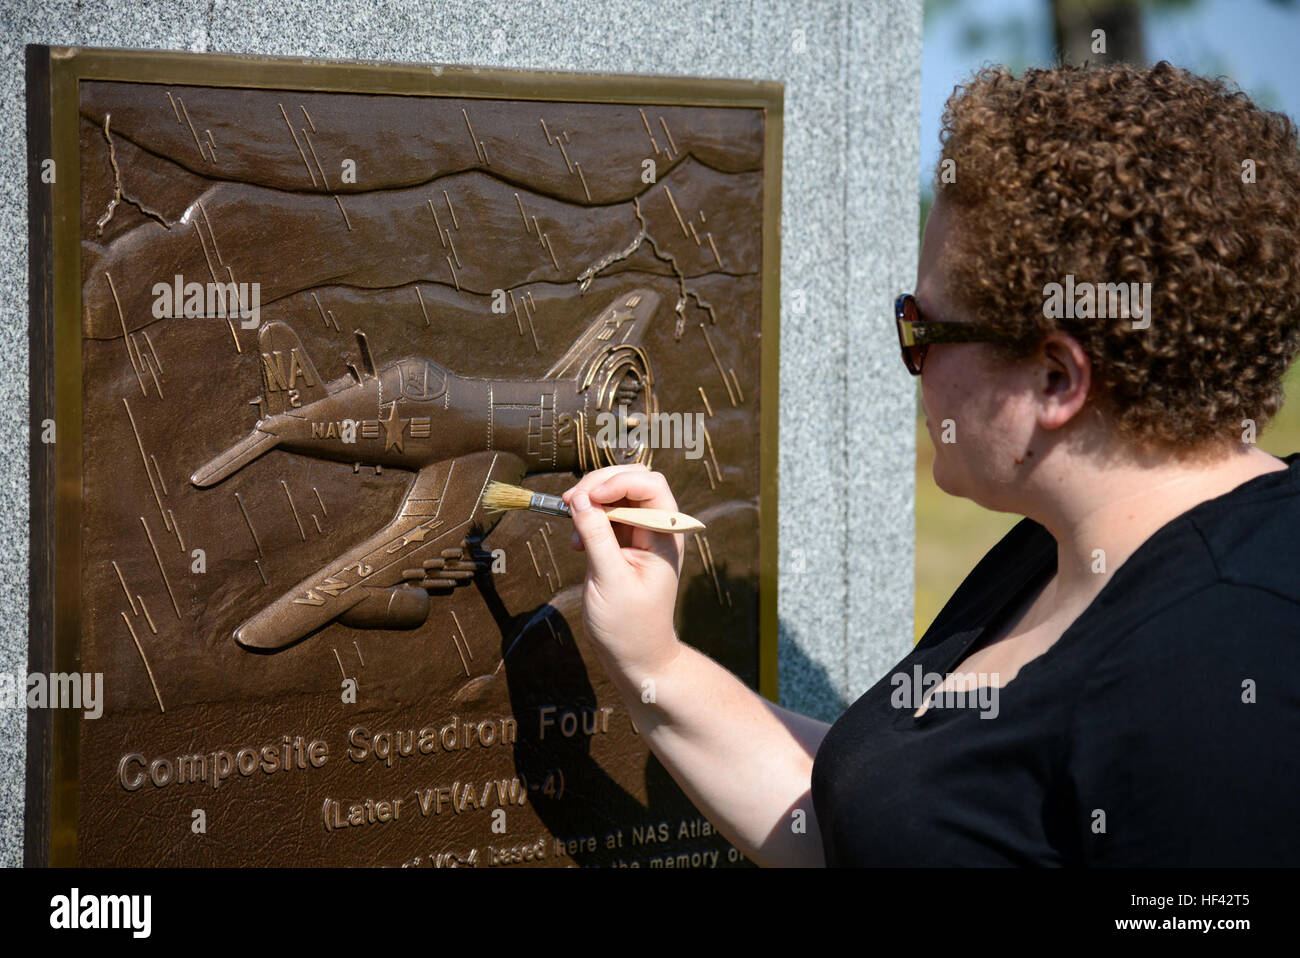 Melissa Swanson, Naval History and Heritage Command Conservator, applies a protective wax polish to a U.S. Navy VC-4 memorial marker, located near the main gate of the 177th Fighter Wing of the New Jersey Air National Guard in Egg Harbor Township, N.J., on July 21, 2016. The monument, erected in May 1994 by the Association of The Composite Squadron Four Nightcappers, pays tribute to the members of the VC-4 Squadron based at Naval Air Station Atlantic City from September 1948 to May 1958 who gave the ultimate sacrifice. Swanson, based out of Richmond, Virginia, earned an undergraduate degree in Stock Photo